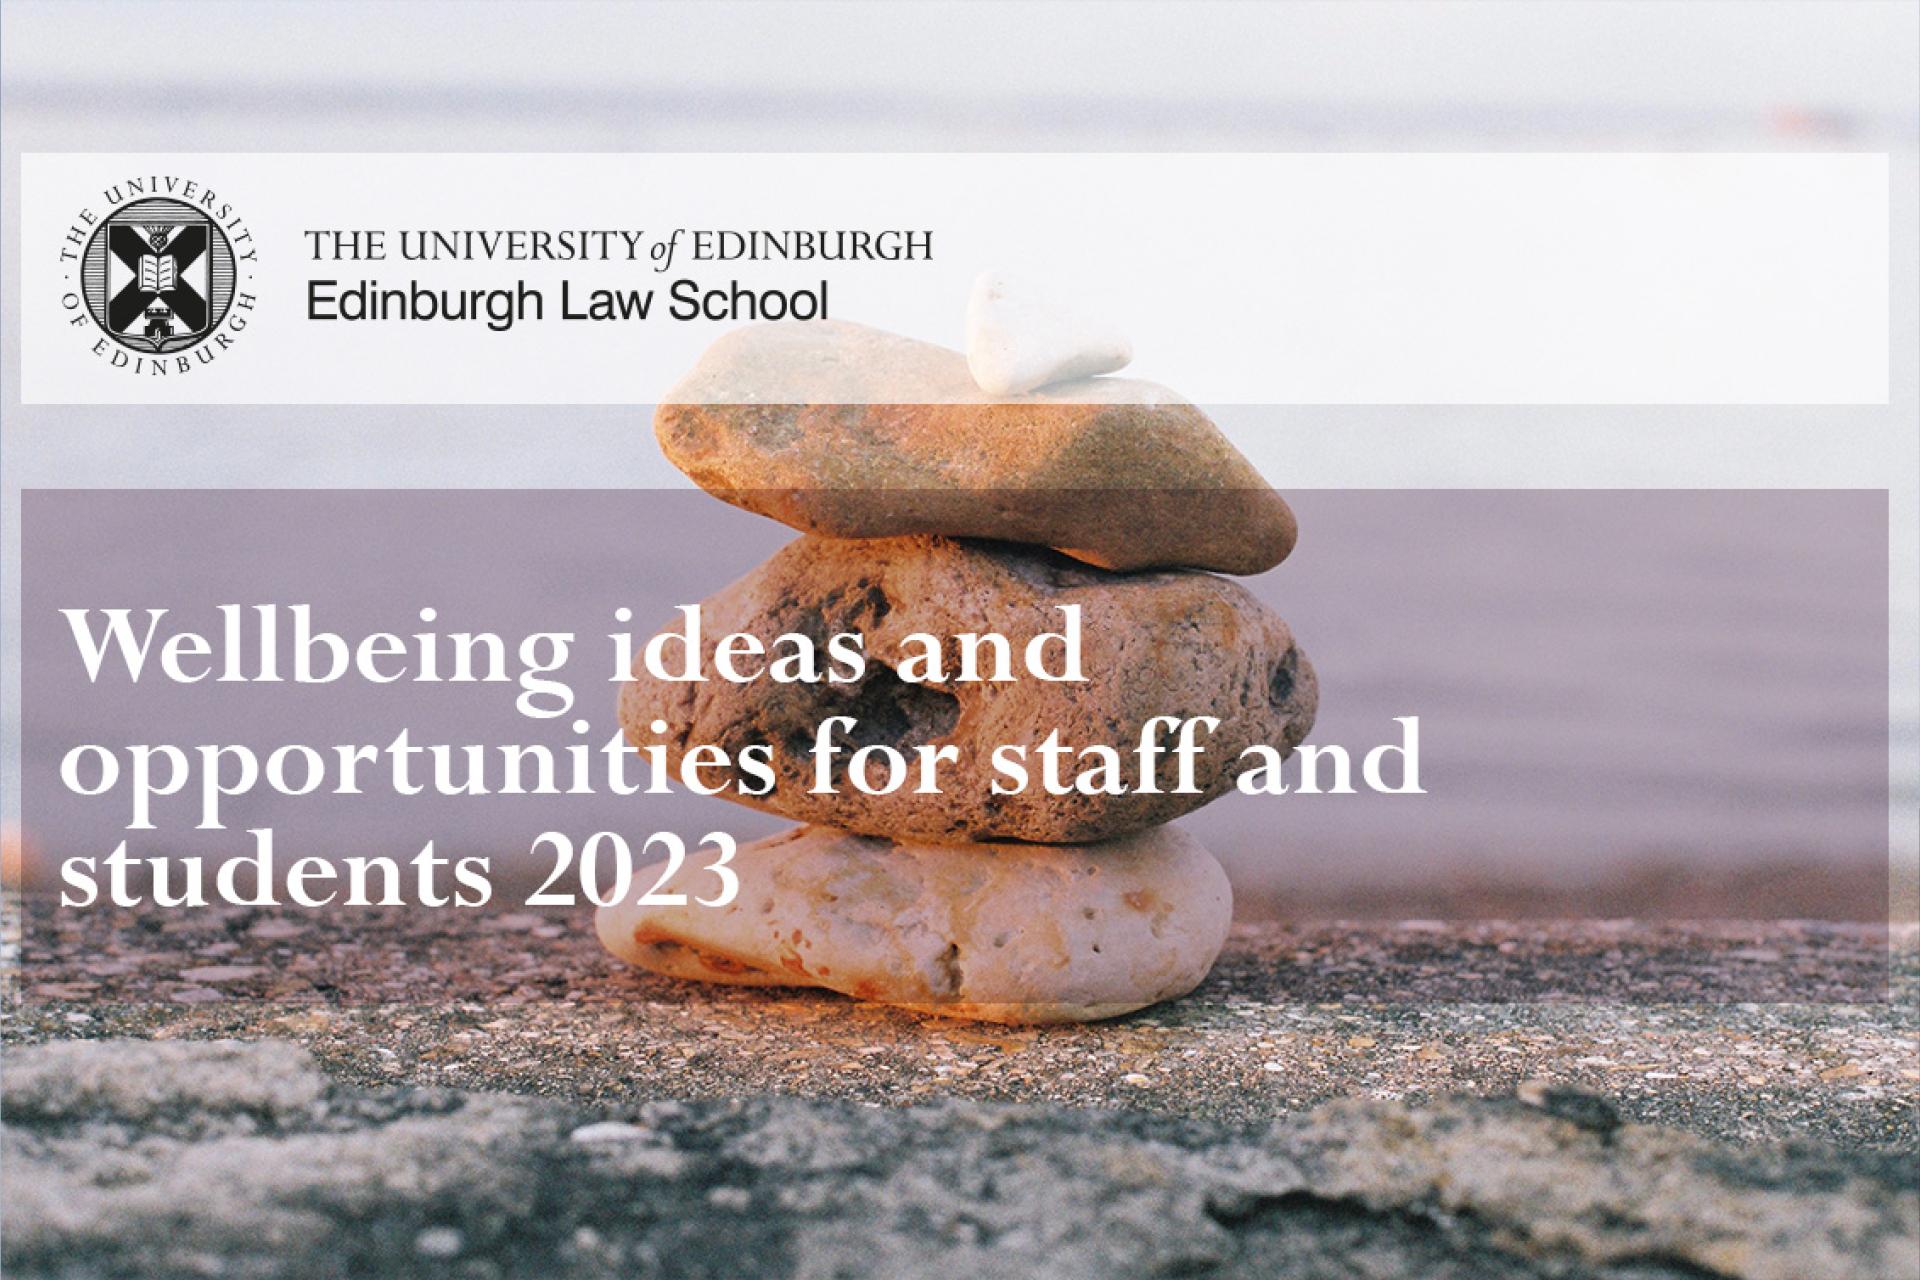 Wellbeing ideas and opportunities for staff and students 2023